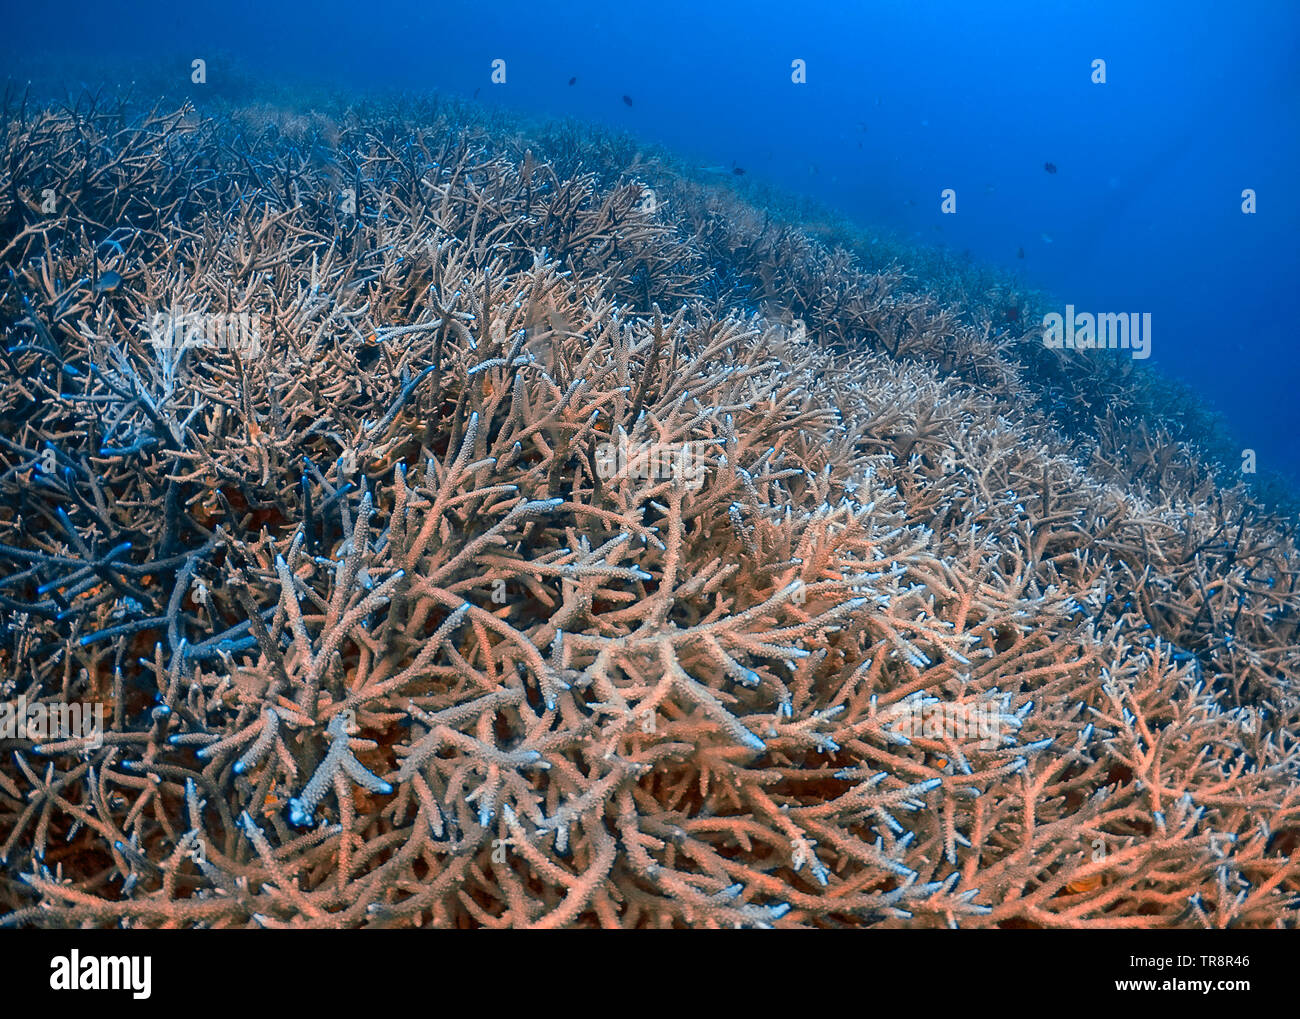 Extensive Branch Coral (Acropora florida) on a reef in El Nido, Palawan, Philippines Stock Photo